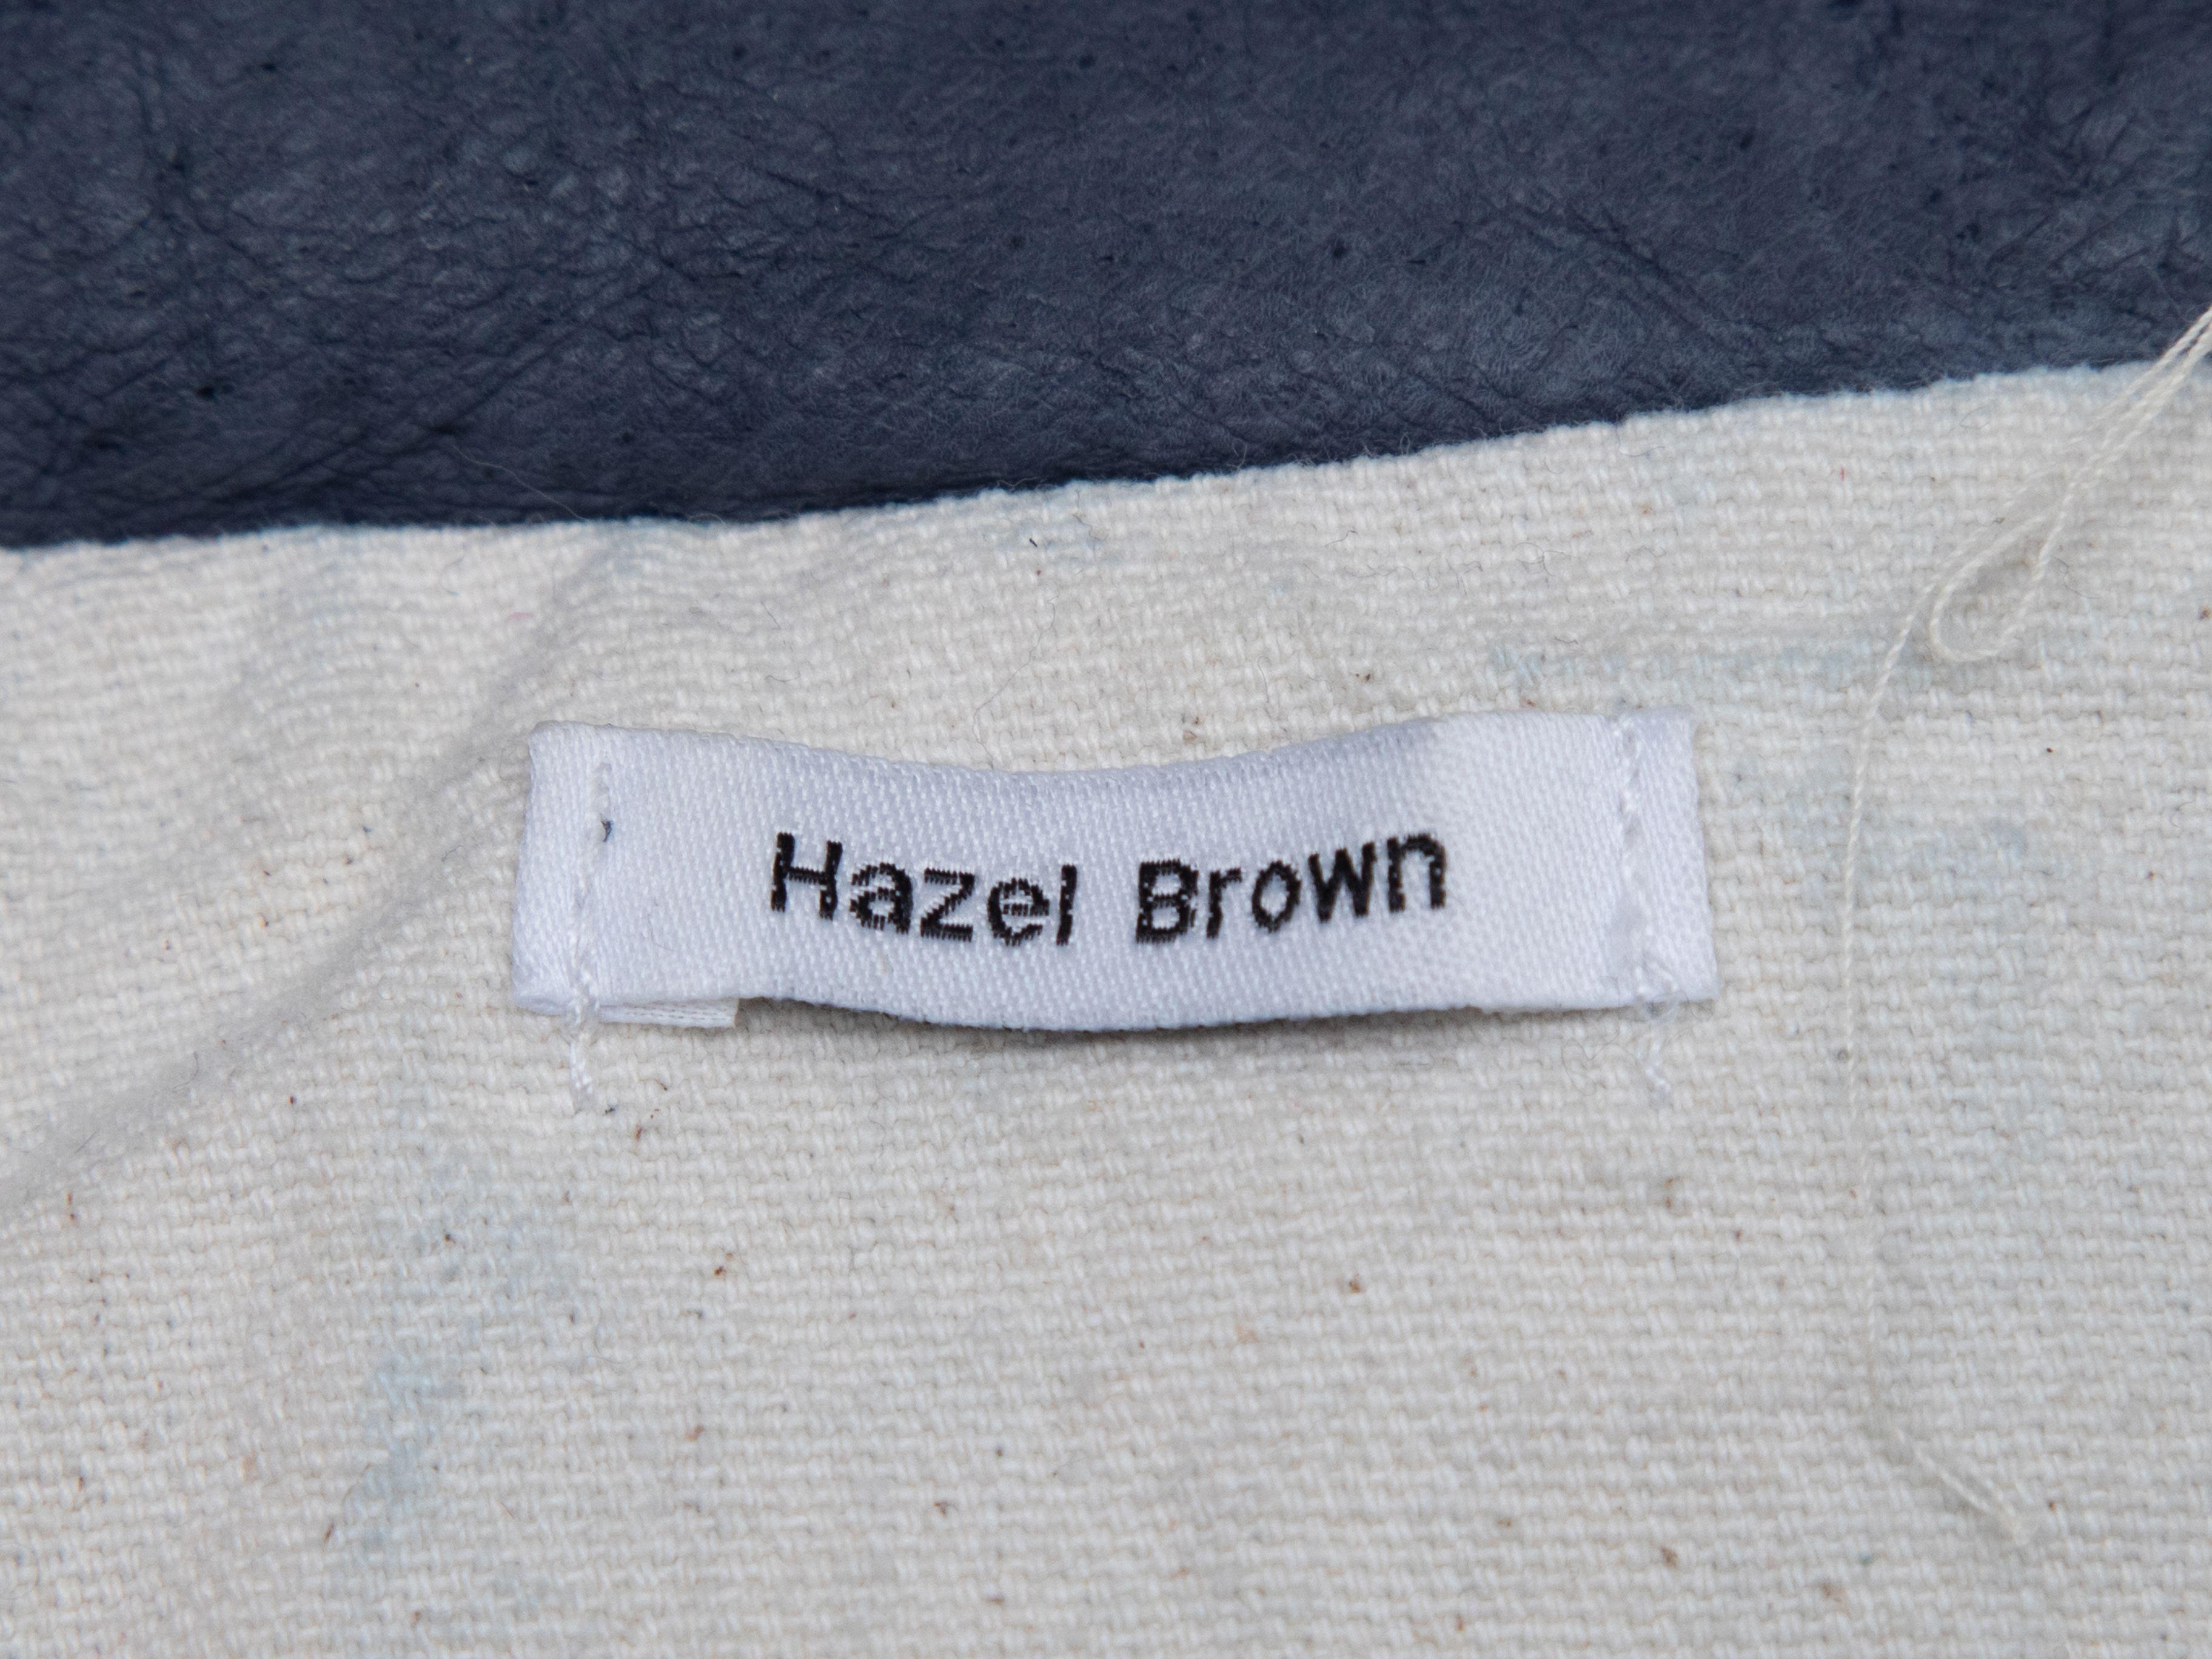 Product Details: Navy leather hooded jacket by Hazel Brown. Four flap pockets at front. Zip closure at center front. 40